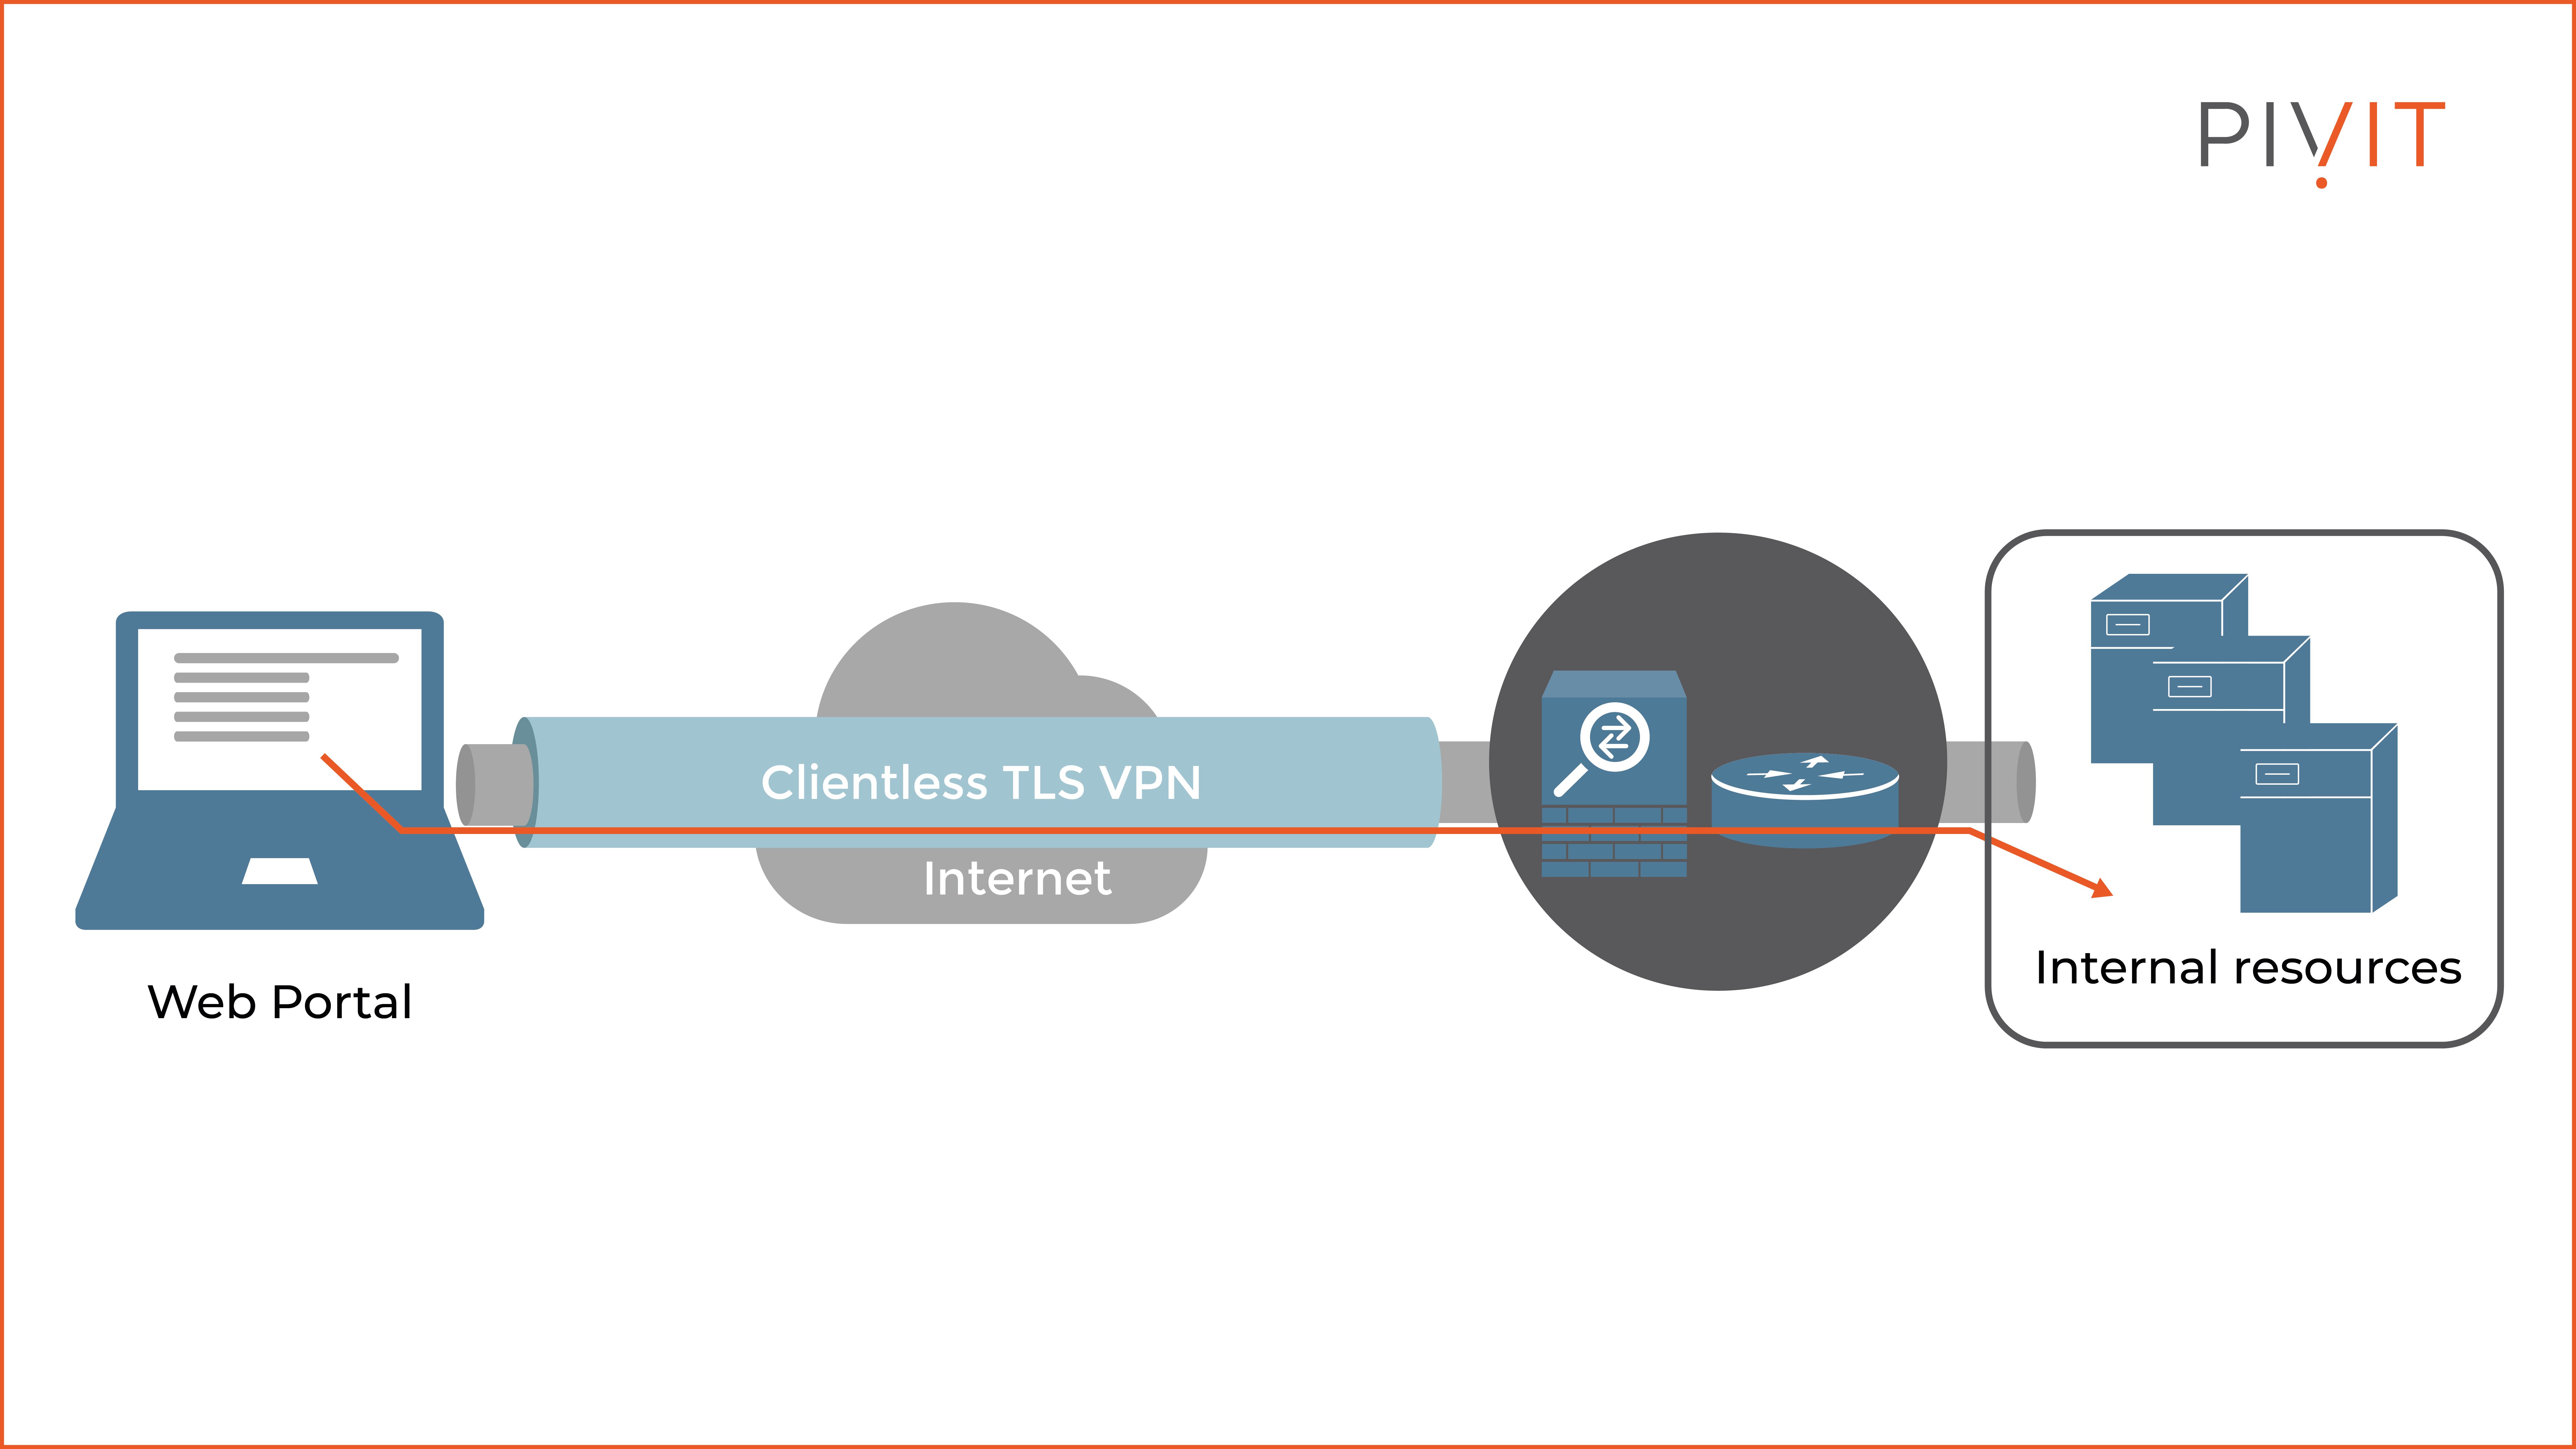 Workings of clientless VPN technology using an example topology containing a web portal, the internet, a clientless TLS VPN, a firewall, and internal resources